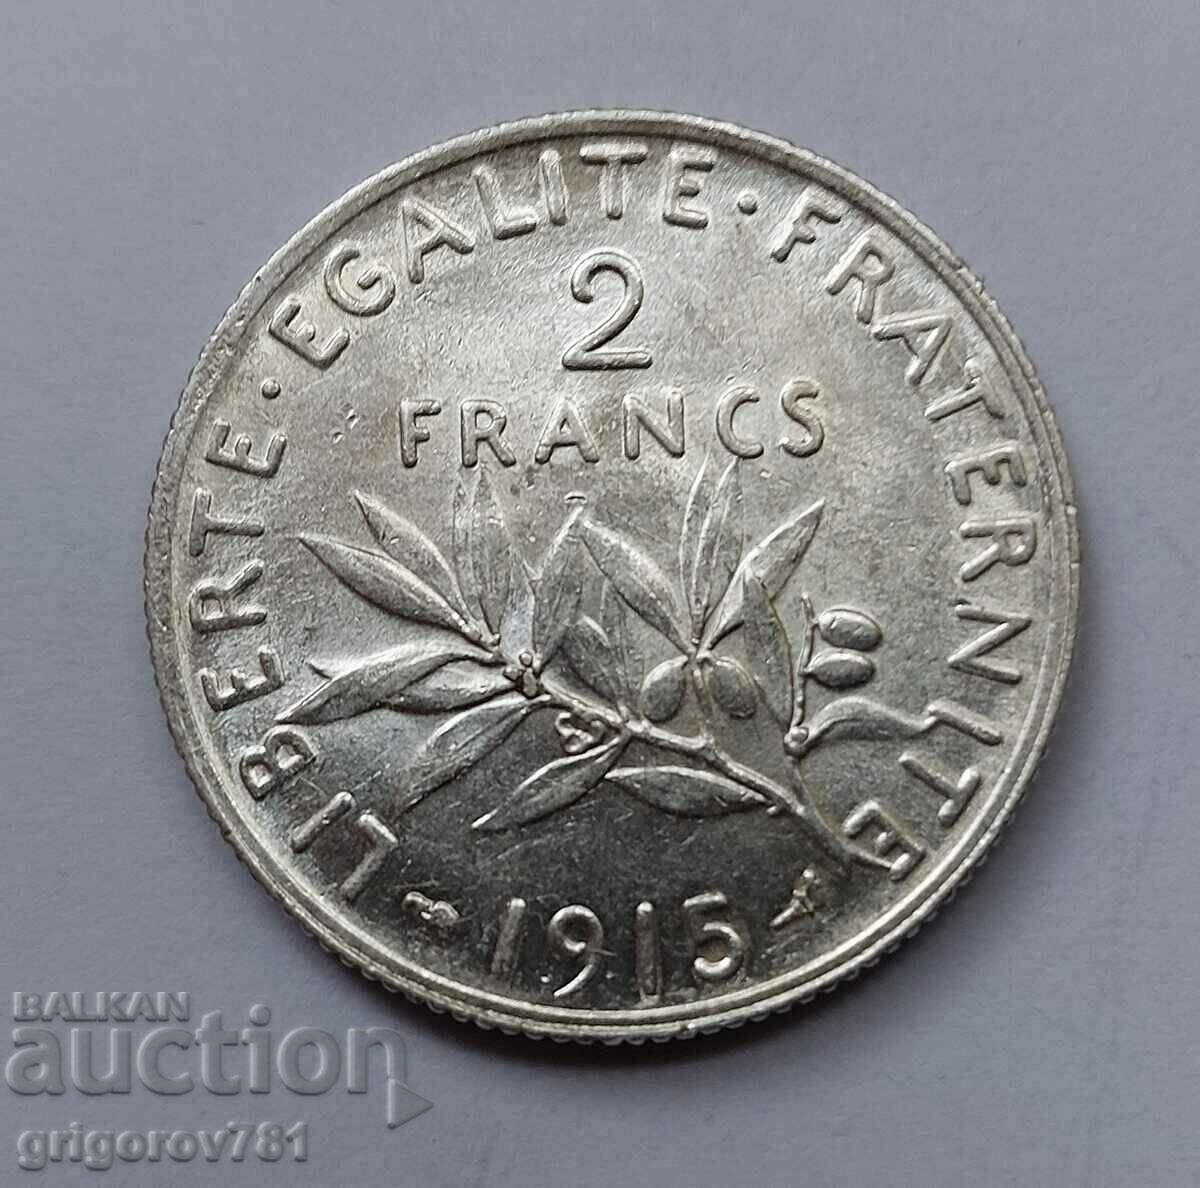 2 Francs Silver France 1915 - Silver Coin #75